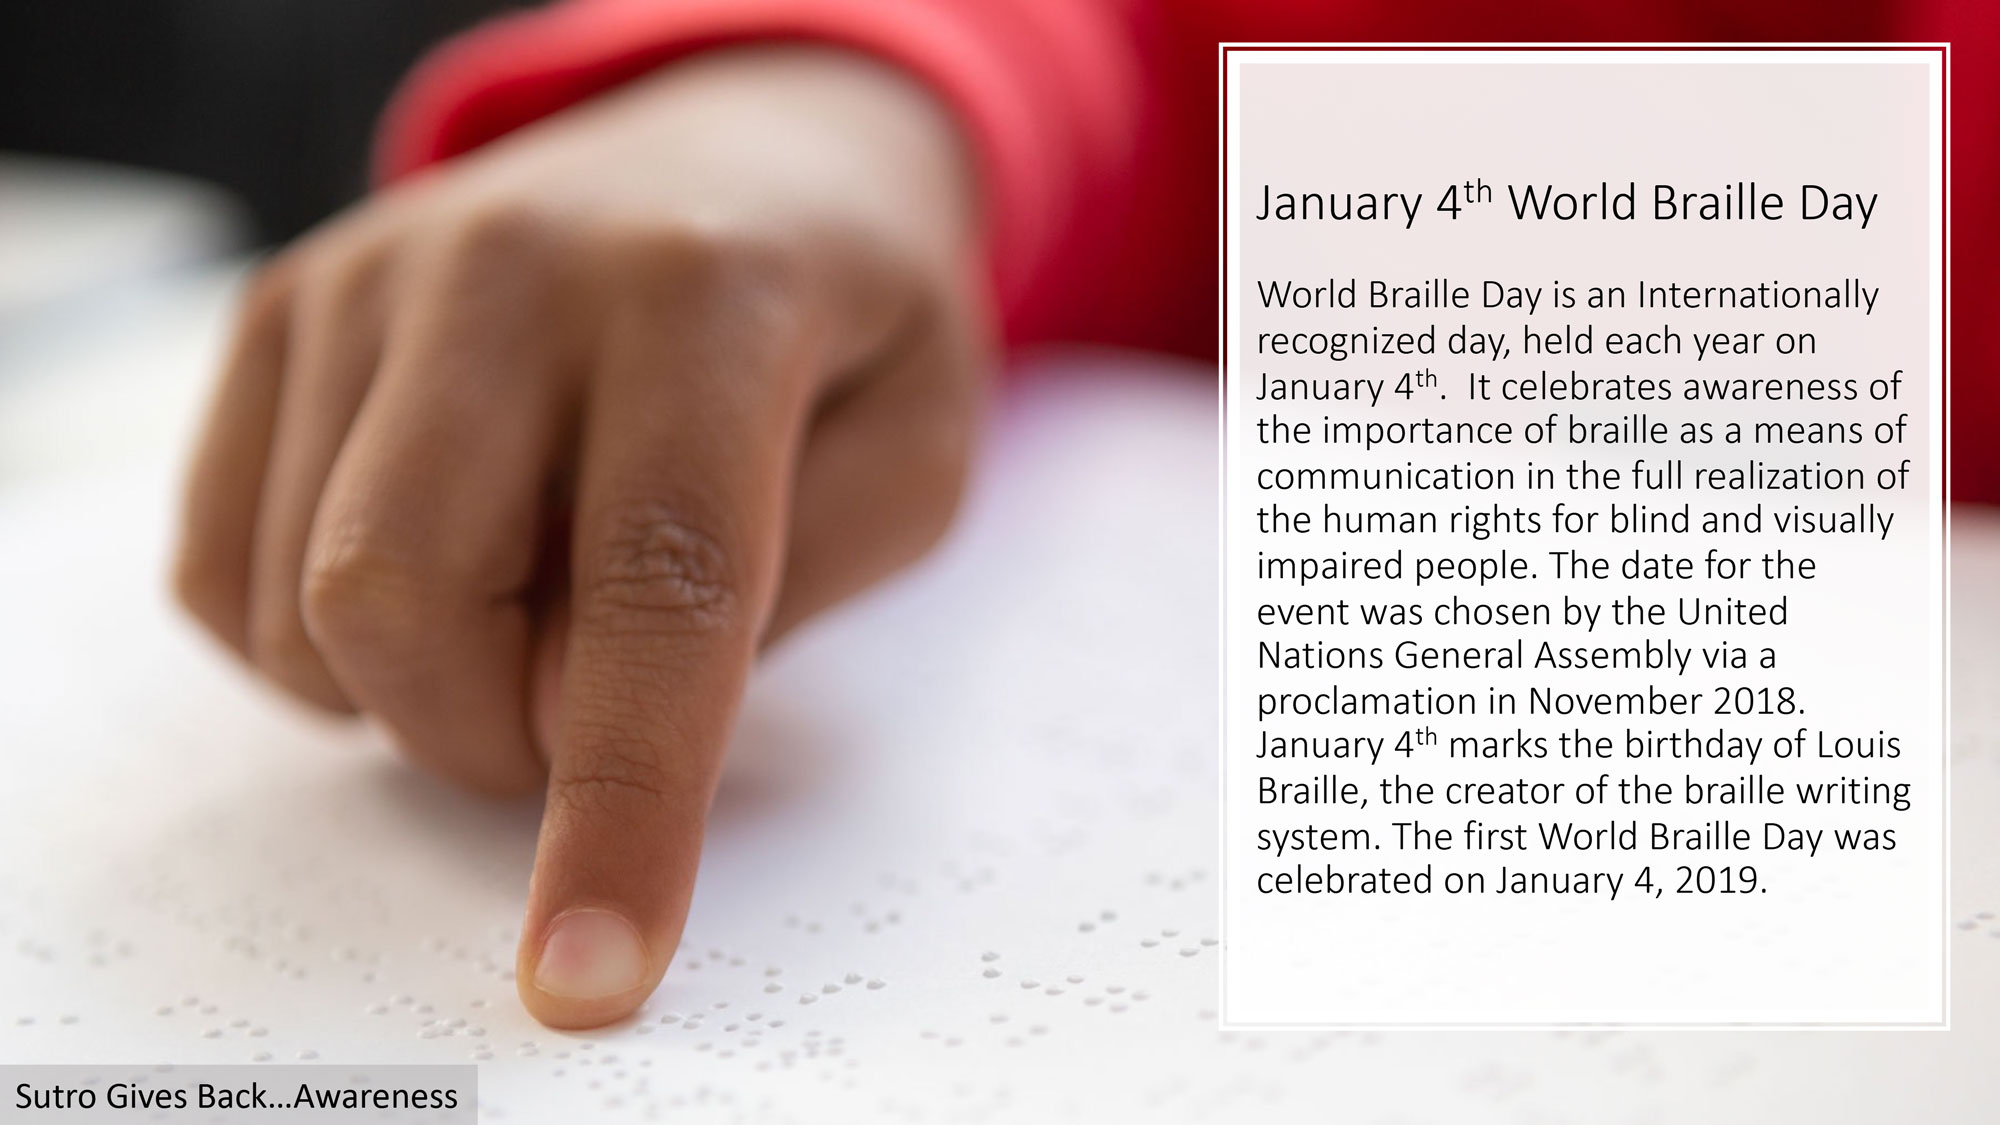 January 4th World Braille Day